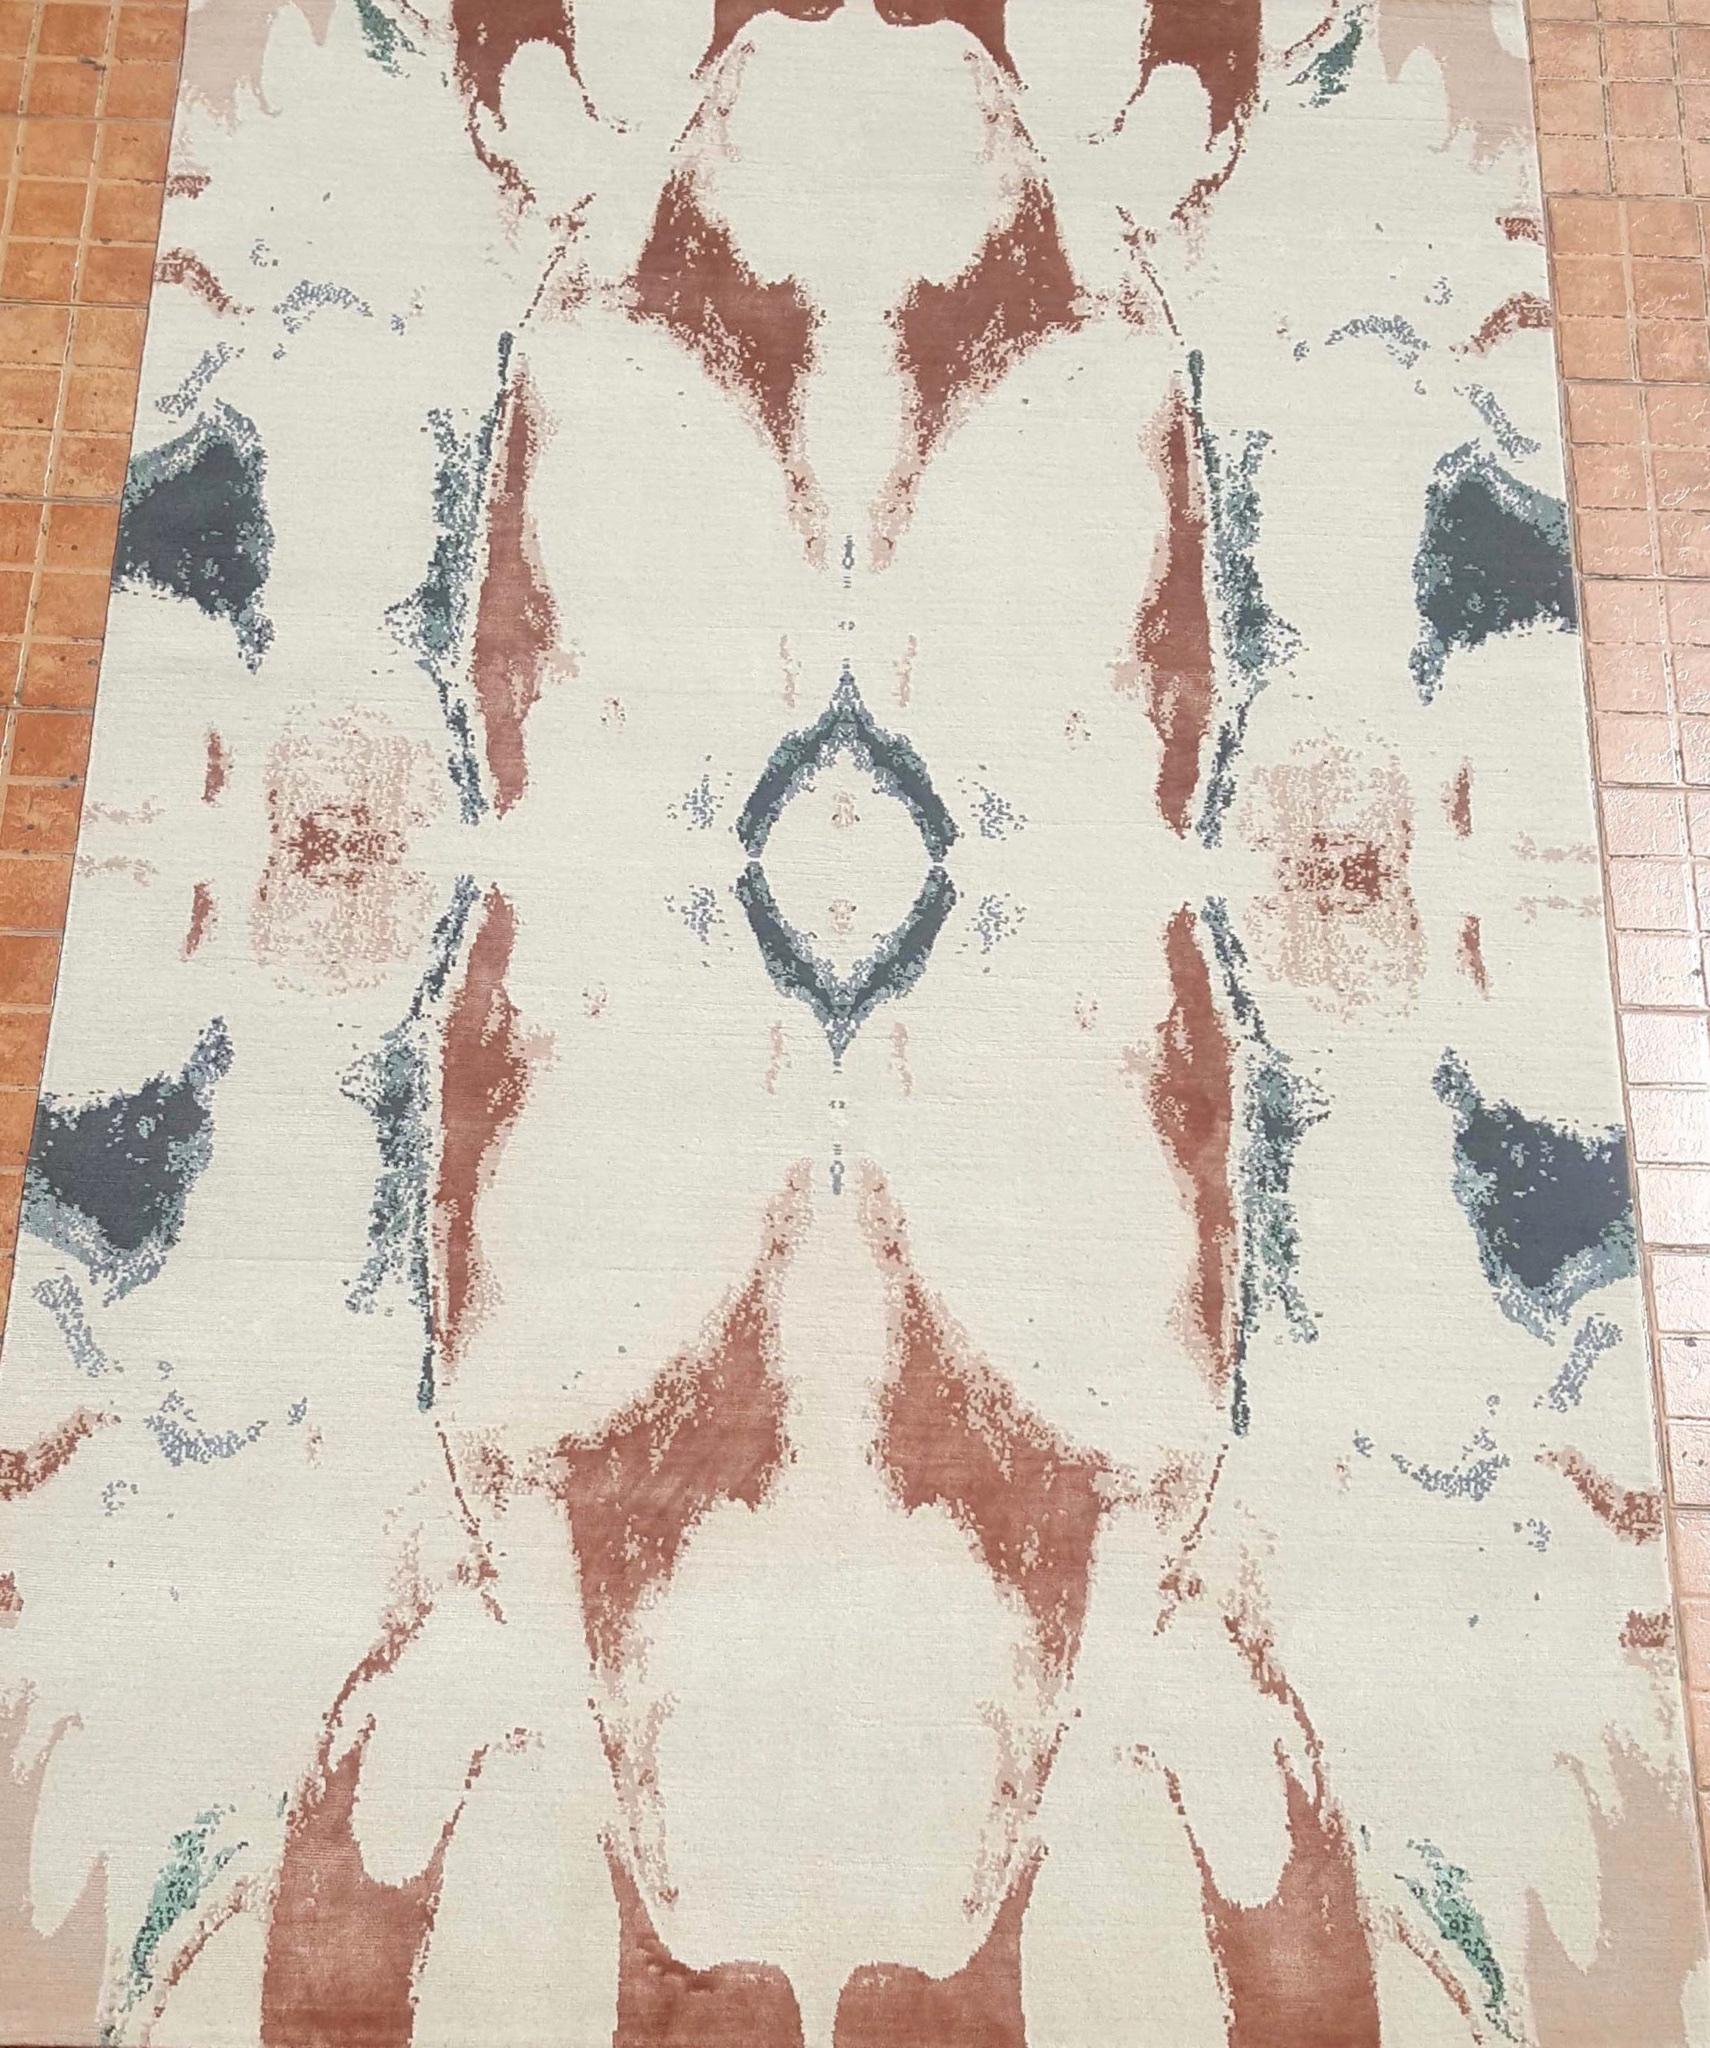 Rich in tonal depth and shading the design is drawn from an original watercolor brushstrokes painting created by the designer. Drift rug is artistic and abstract and offers a play of subtle color transition, merged together and blended in wool and